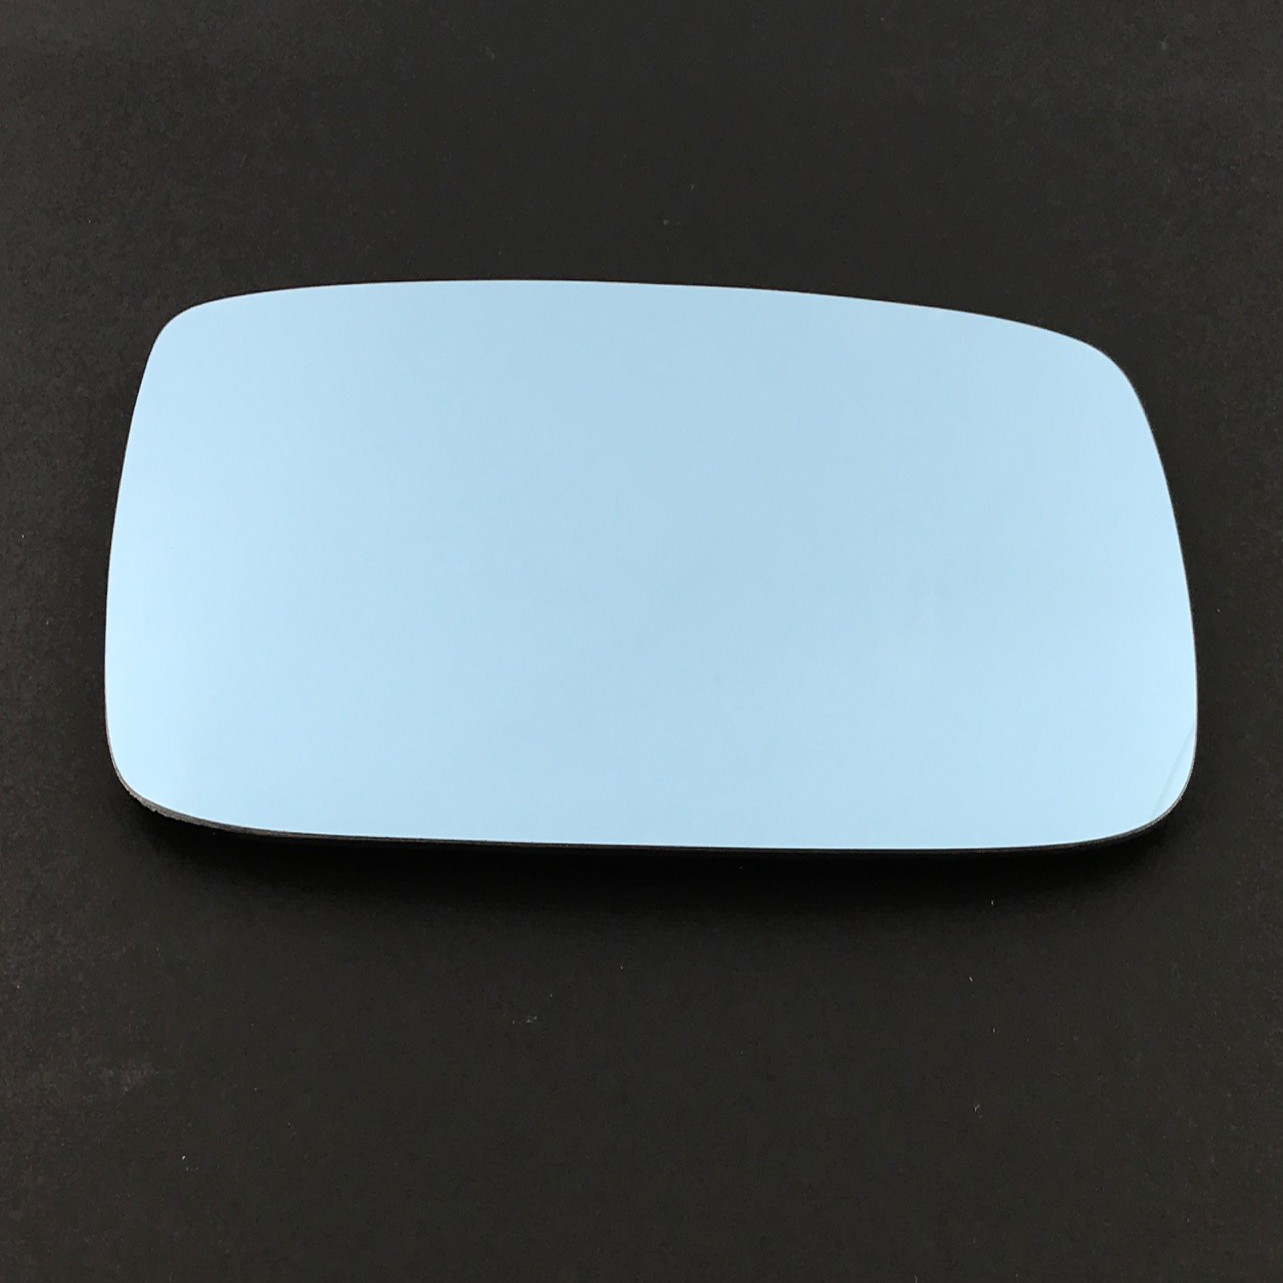 Volvo S80 Wing Mirror Glass LEFT HAND ( UK Passenger Side ) 1997 to 1998 – Convex Wing Mirror ( Blue Tinted )